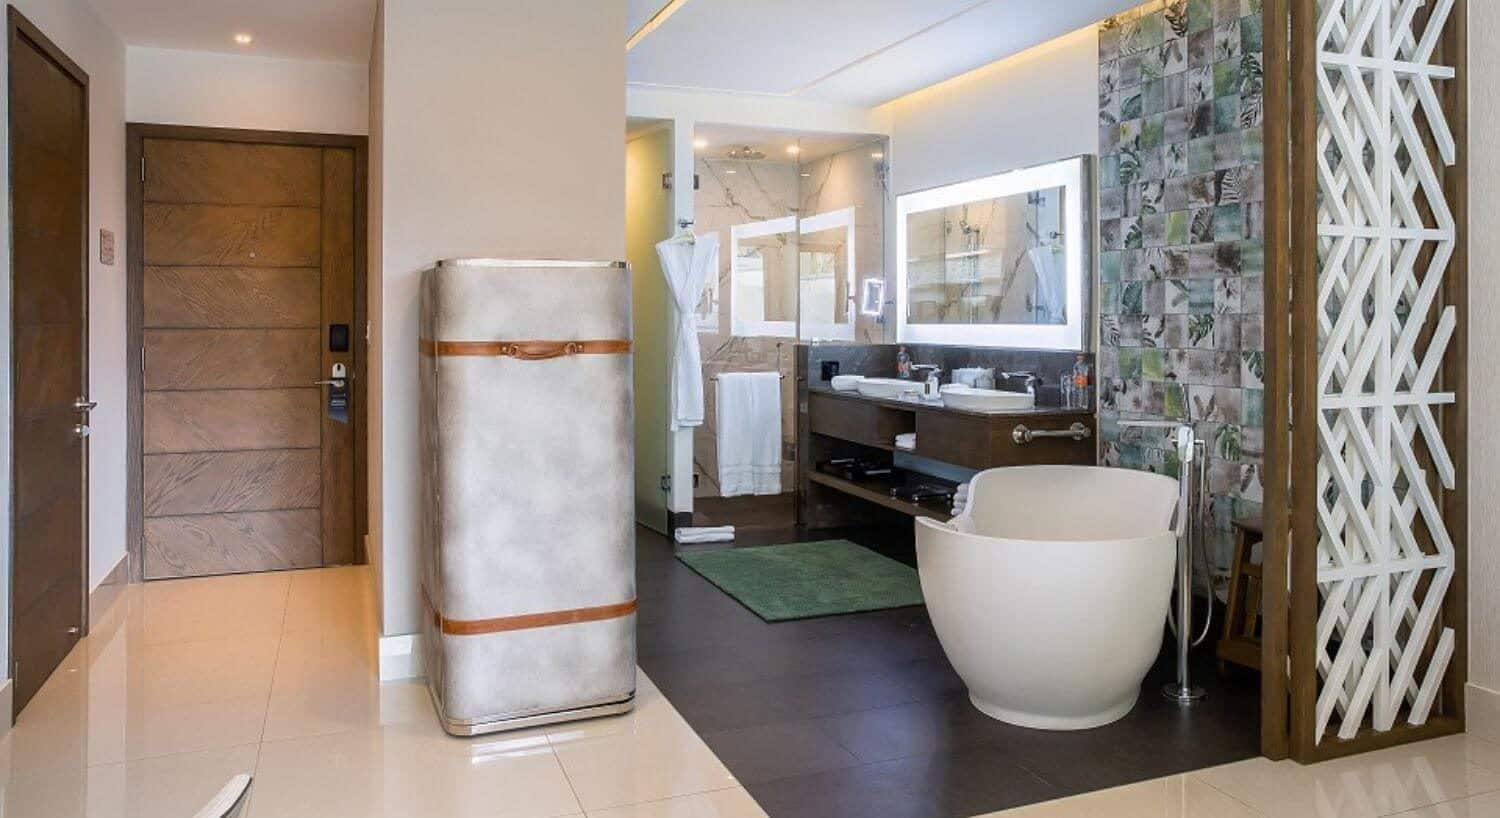 A room with a stainless steel trunk that opens to a hidden coffee center, and a bathroom with a deep soaking tub, a vanity with 2 sinks, and wide lit mirror above the vanity, and a walk in shower.